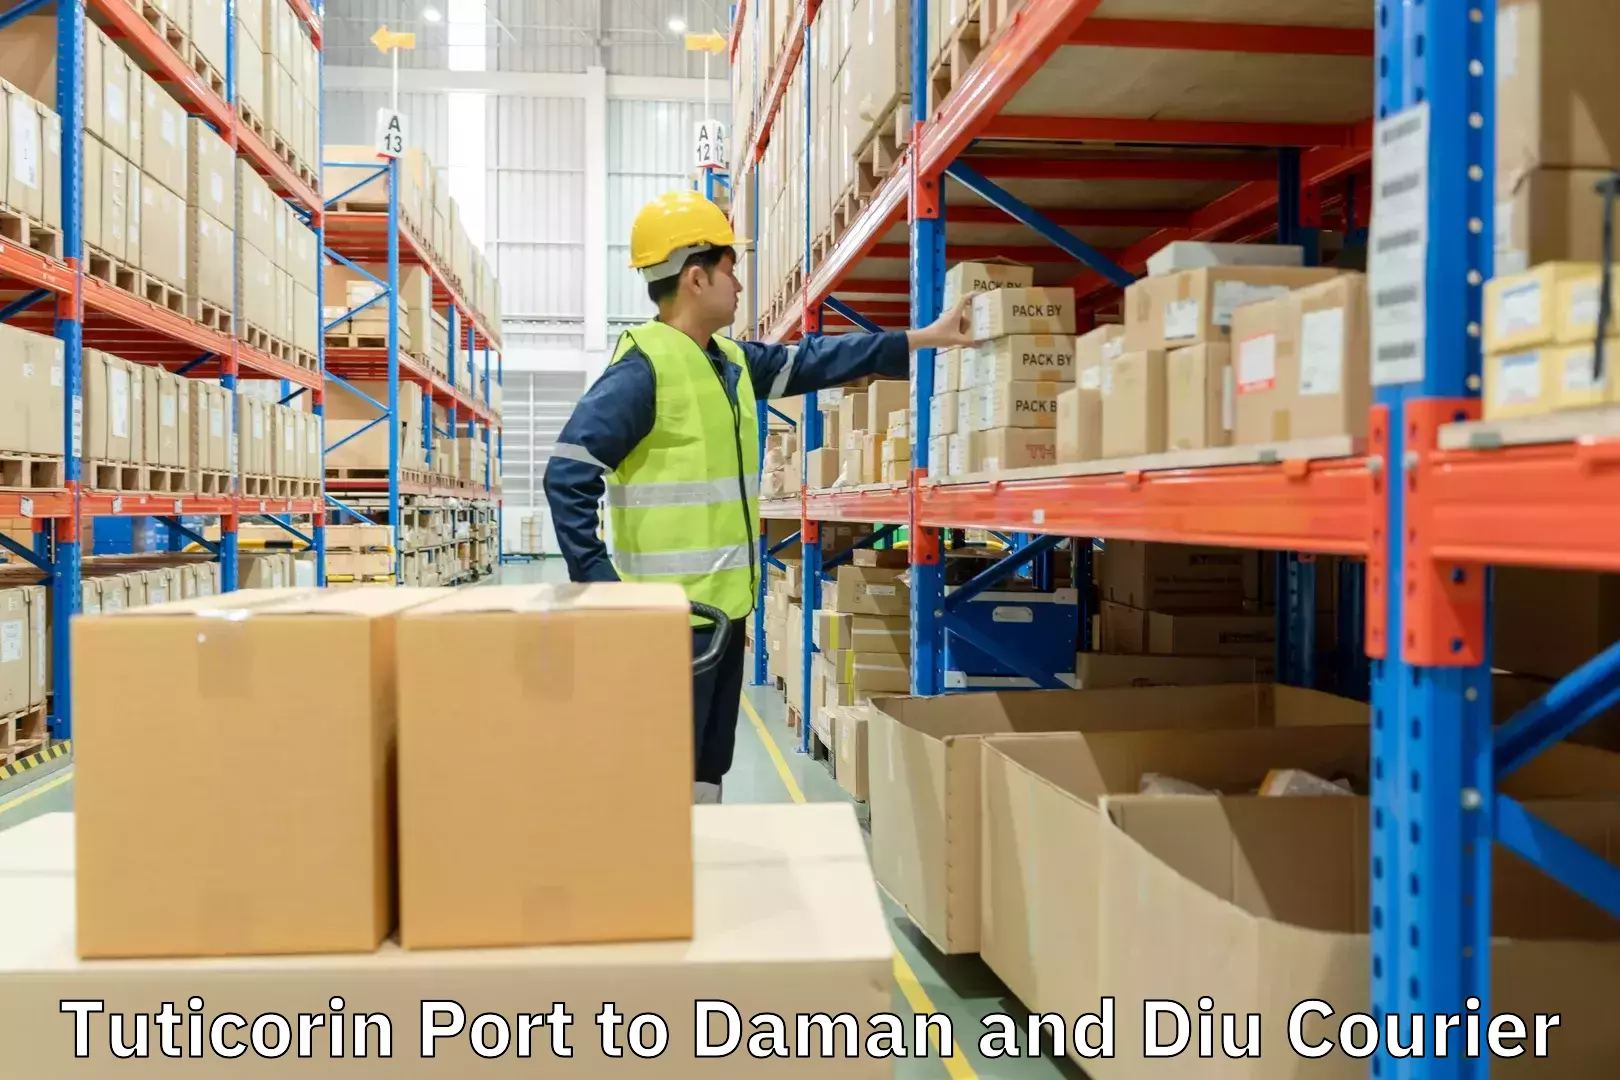 Punctual parcel services Tuticorin Port to Daman and Diu